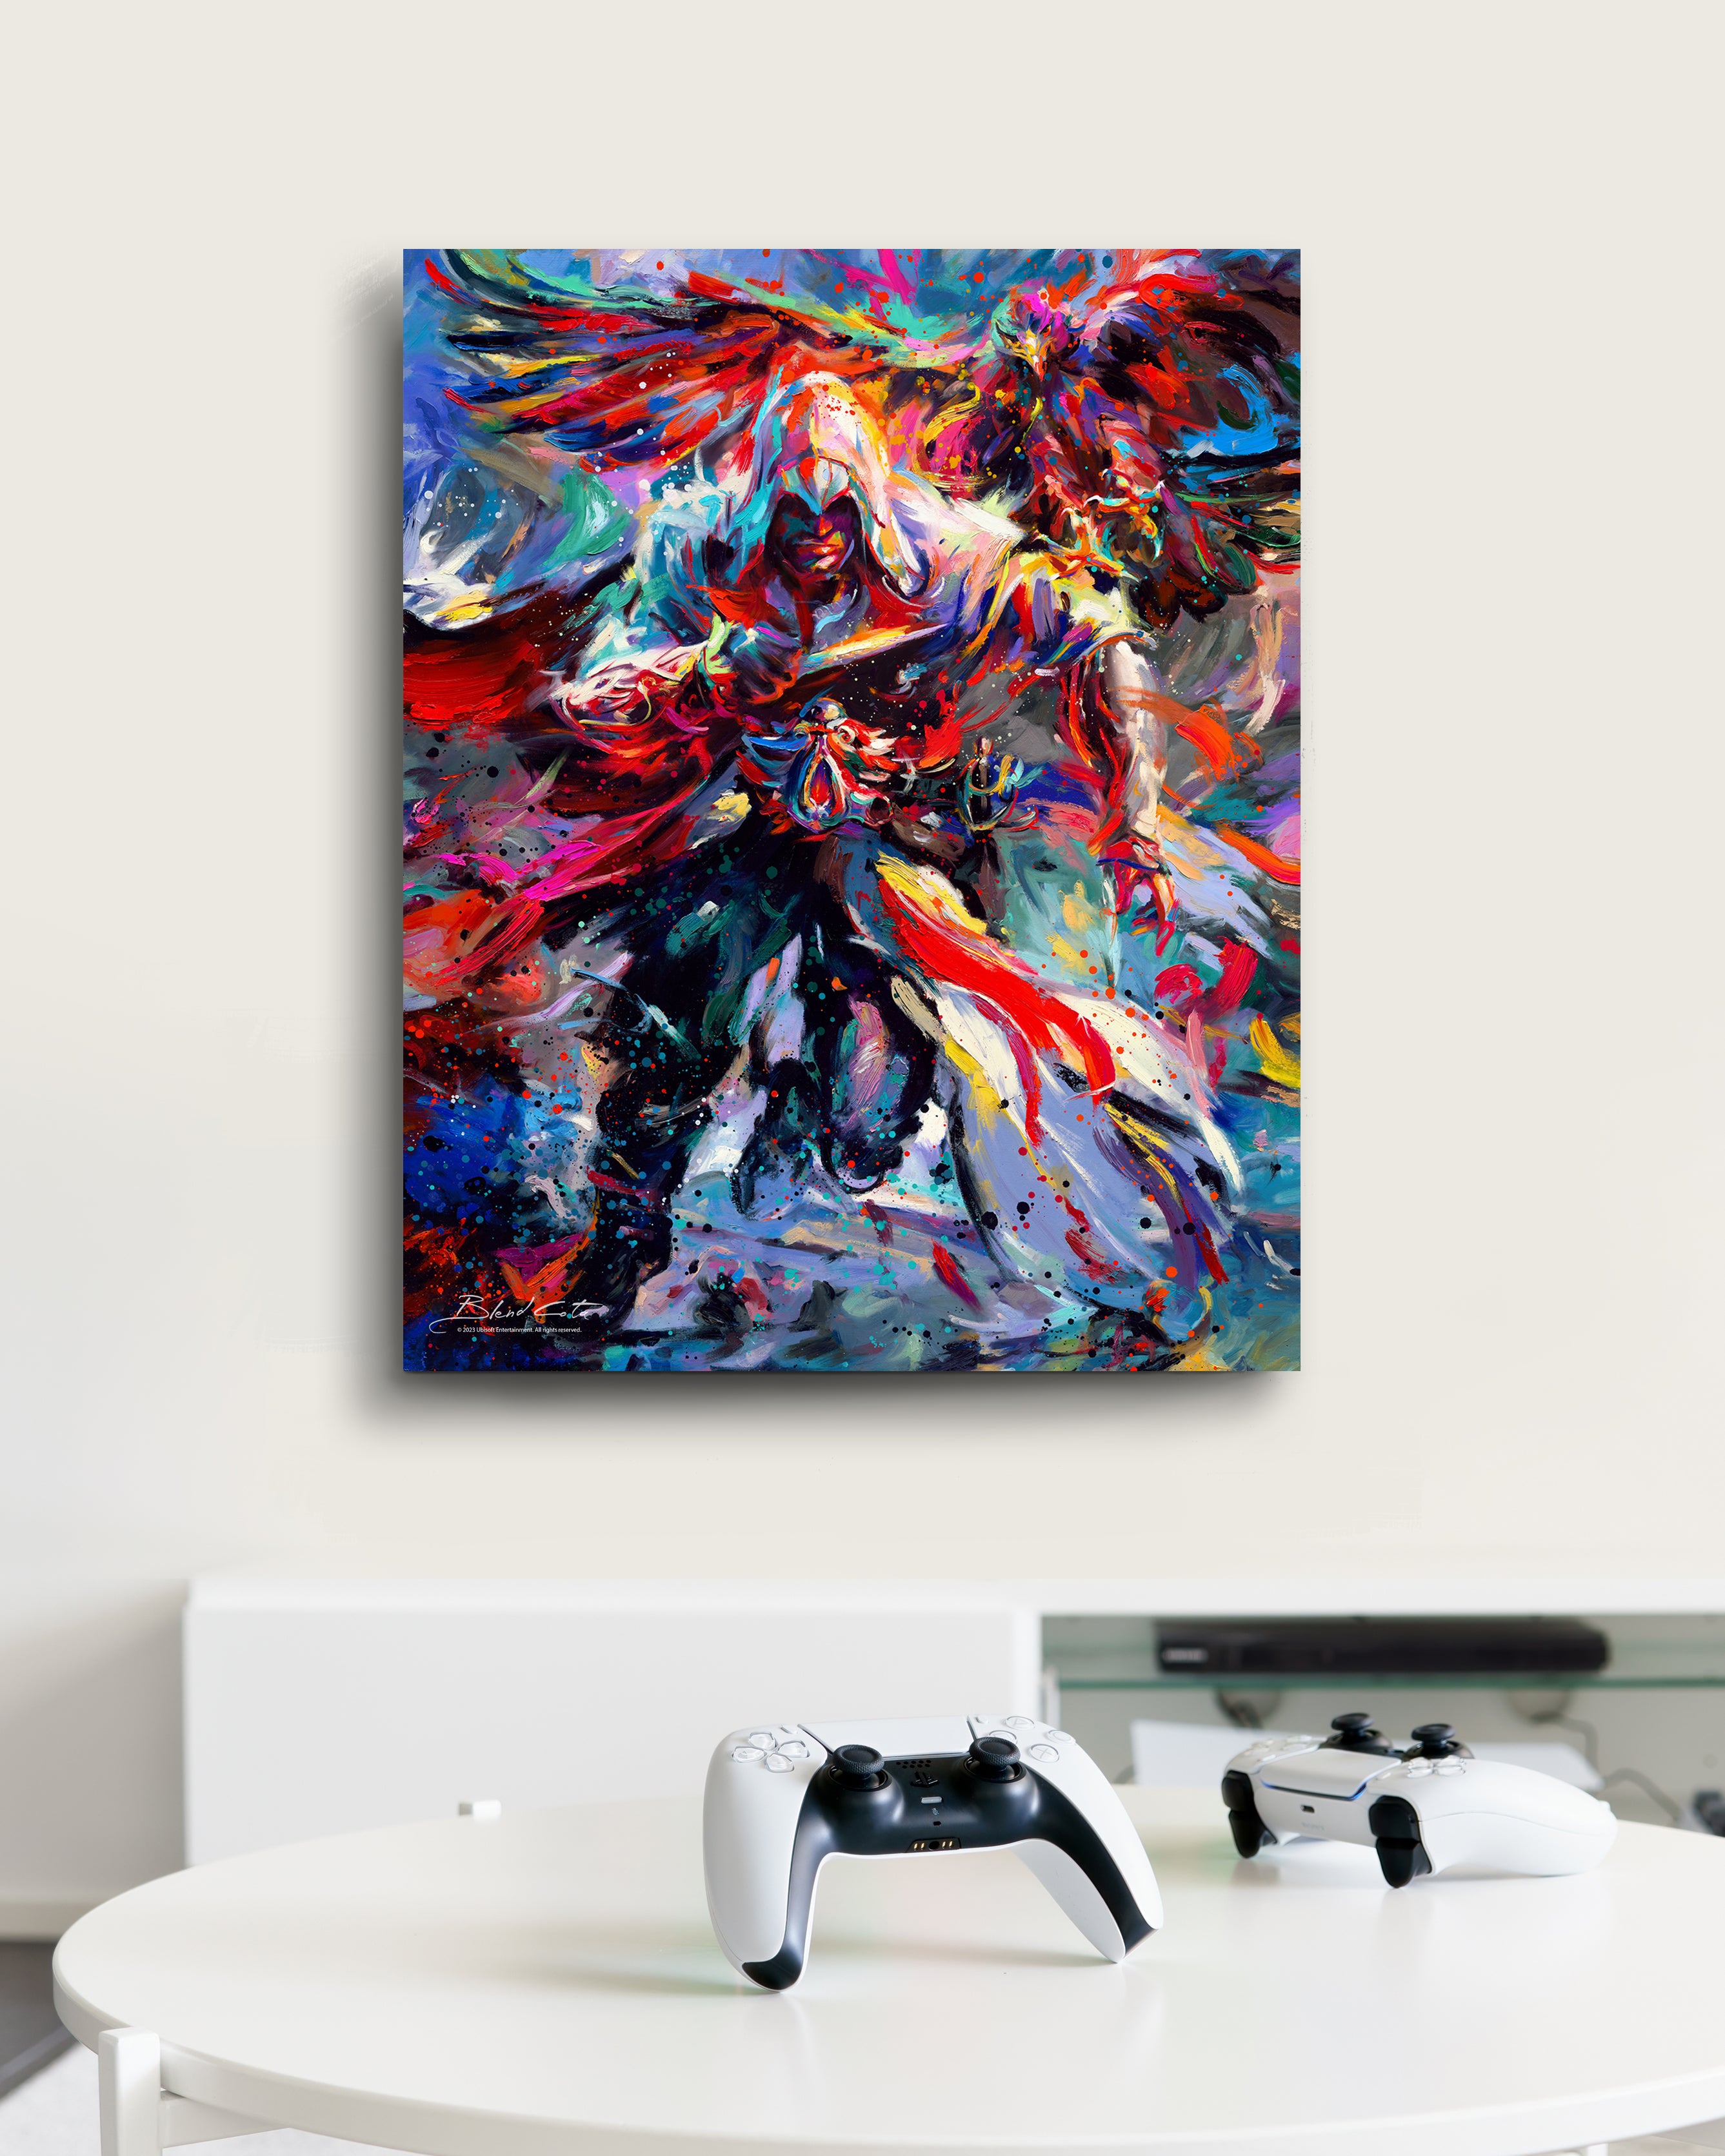 Limited Edition glossy metal print of Assassin's Creed Ezio Auditore and Eagle bursting forth with energy and painted with colorful brushstrokes in an expressionistic style in a room setting.